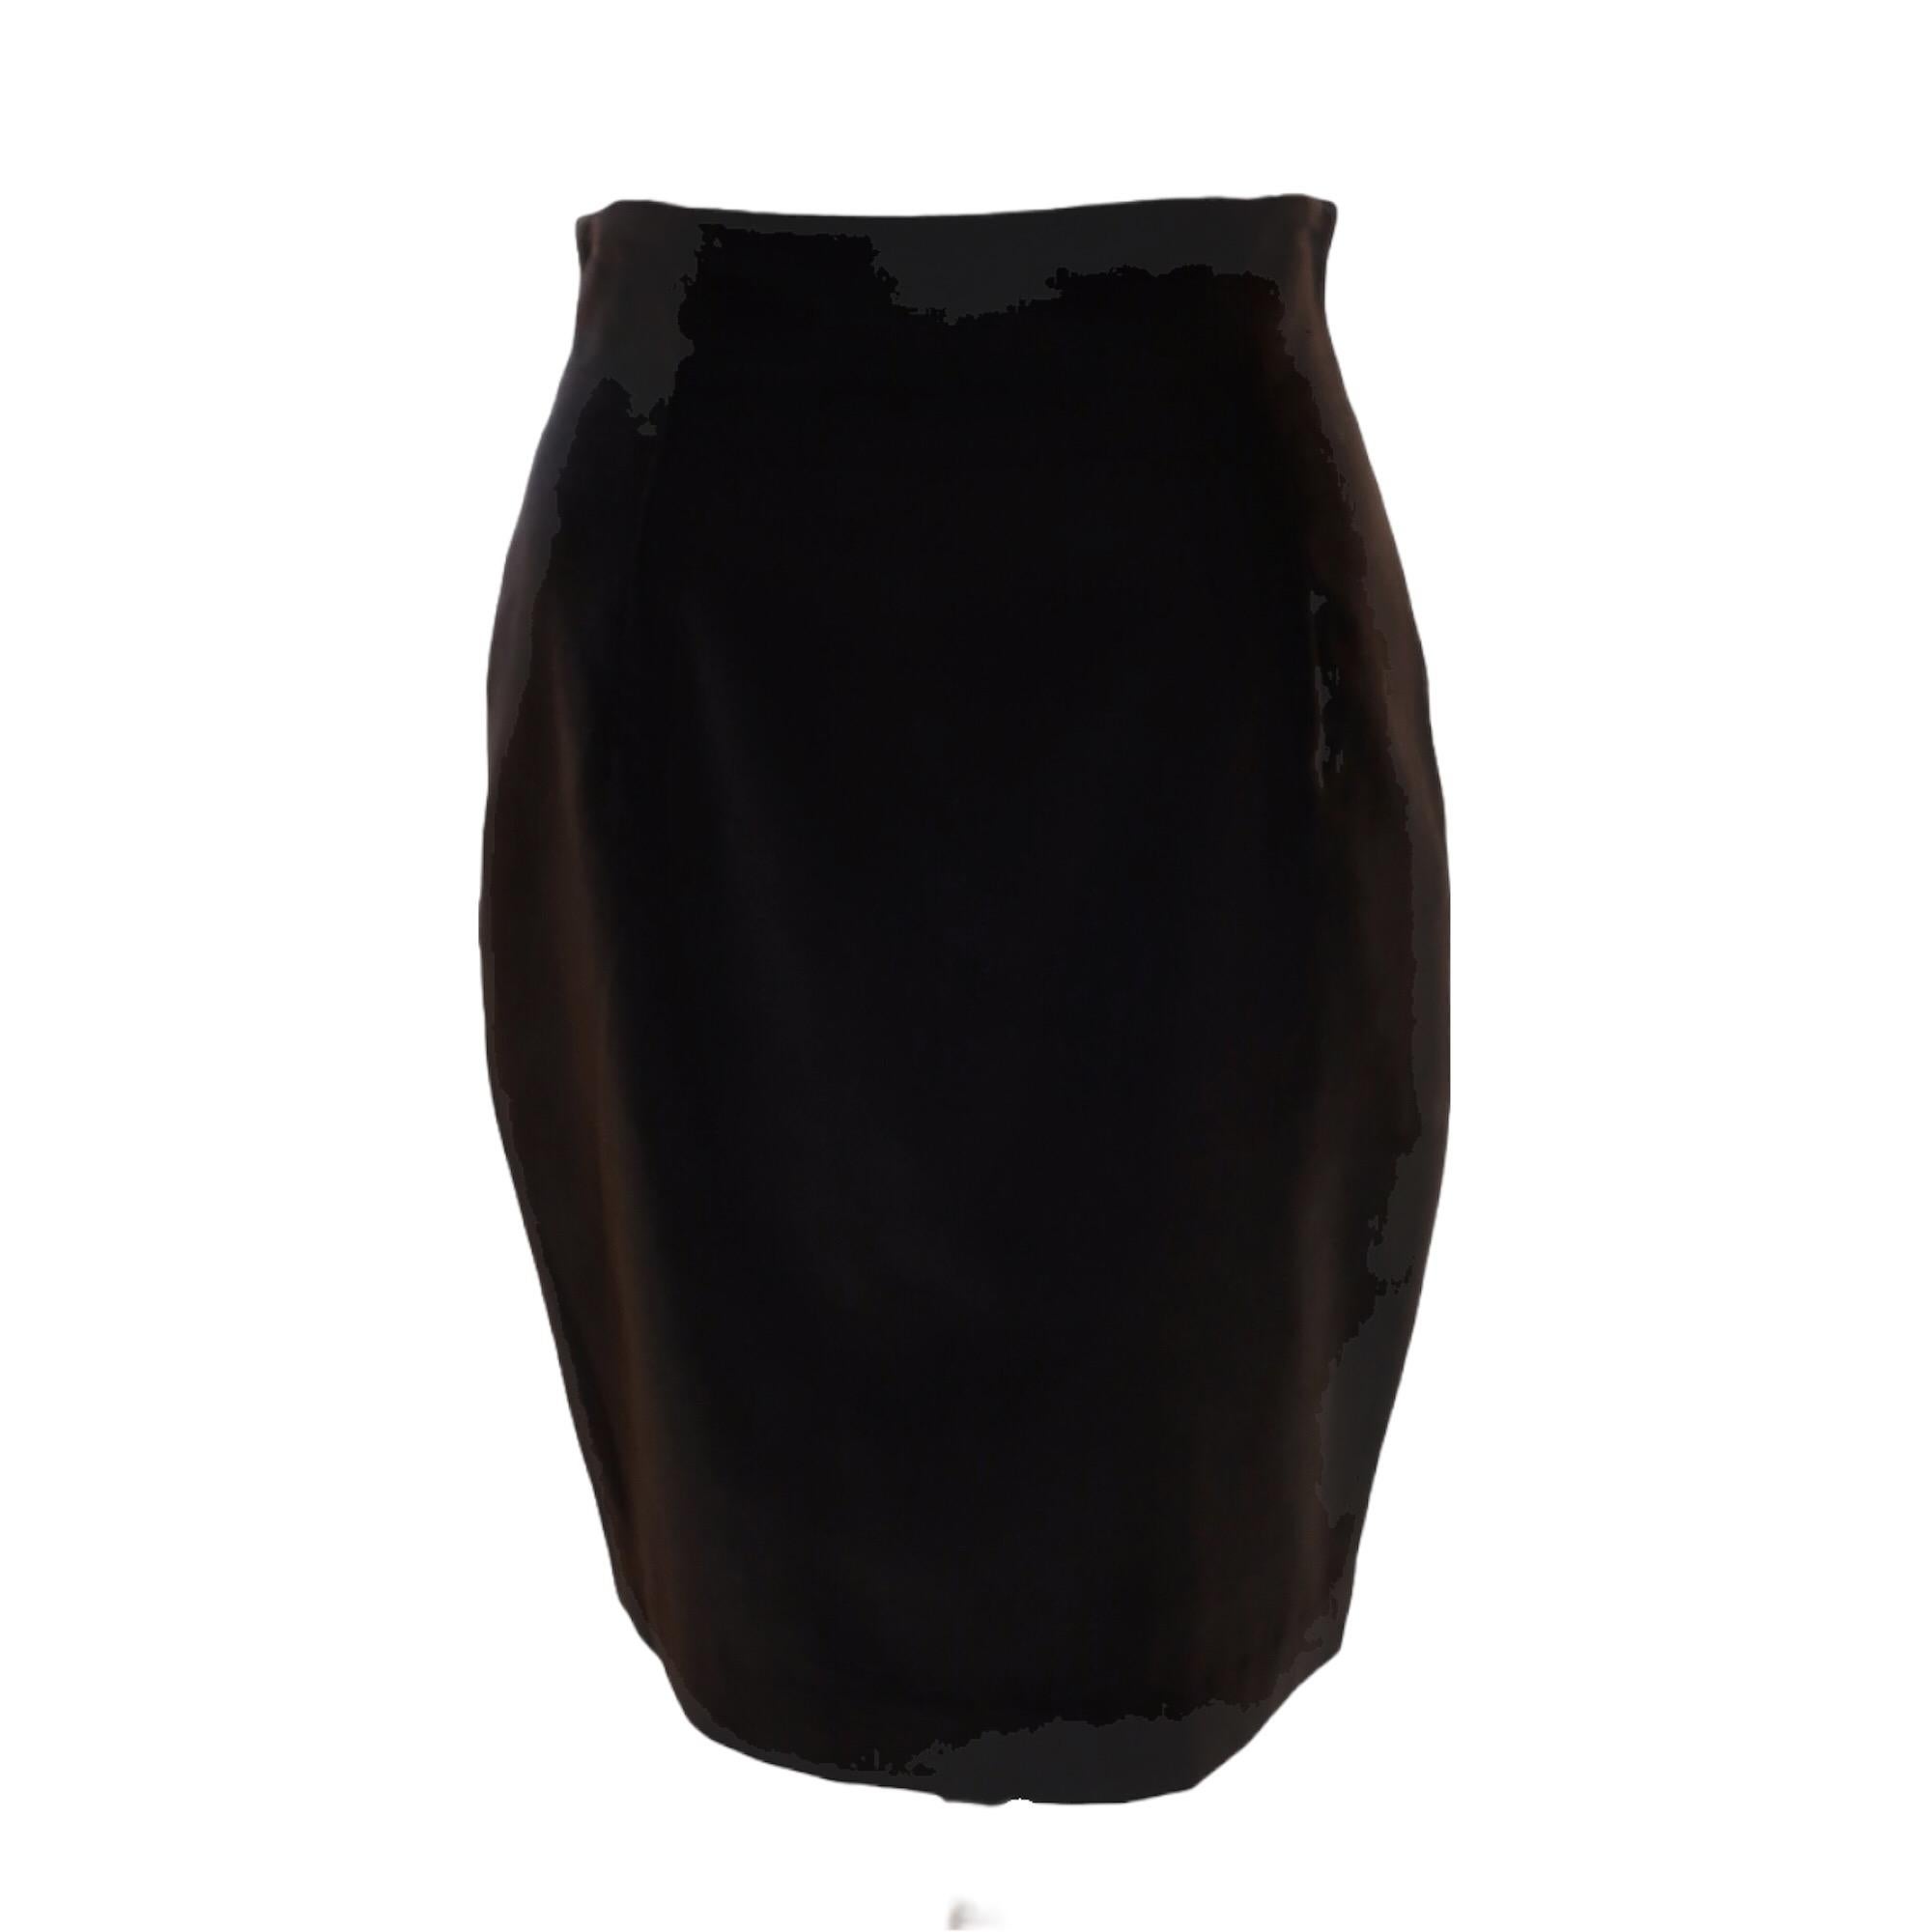 An elegant and simple black velvet curve-hugging pencil skirt from vintage Chantal Thomass zips up the back.